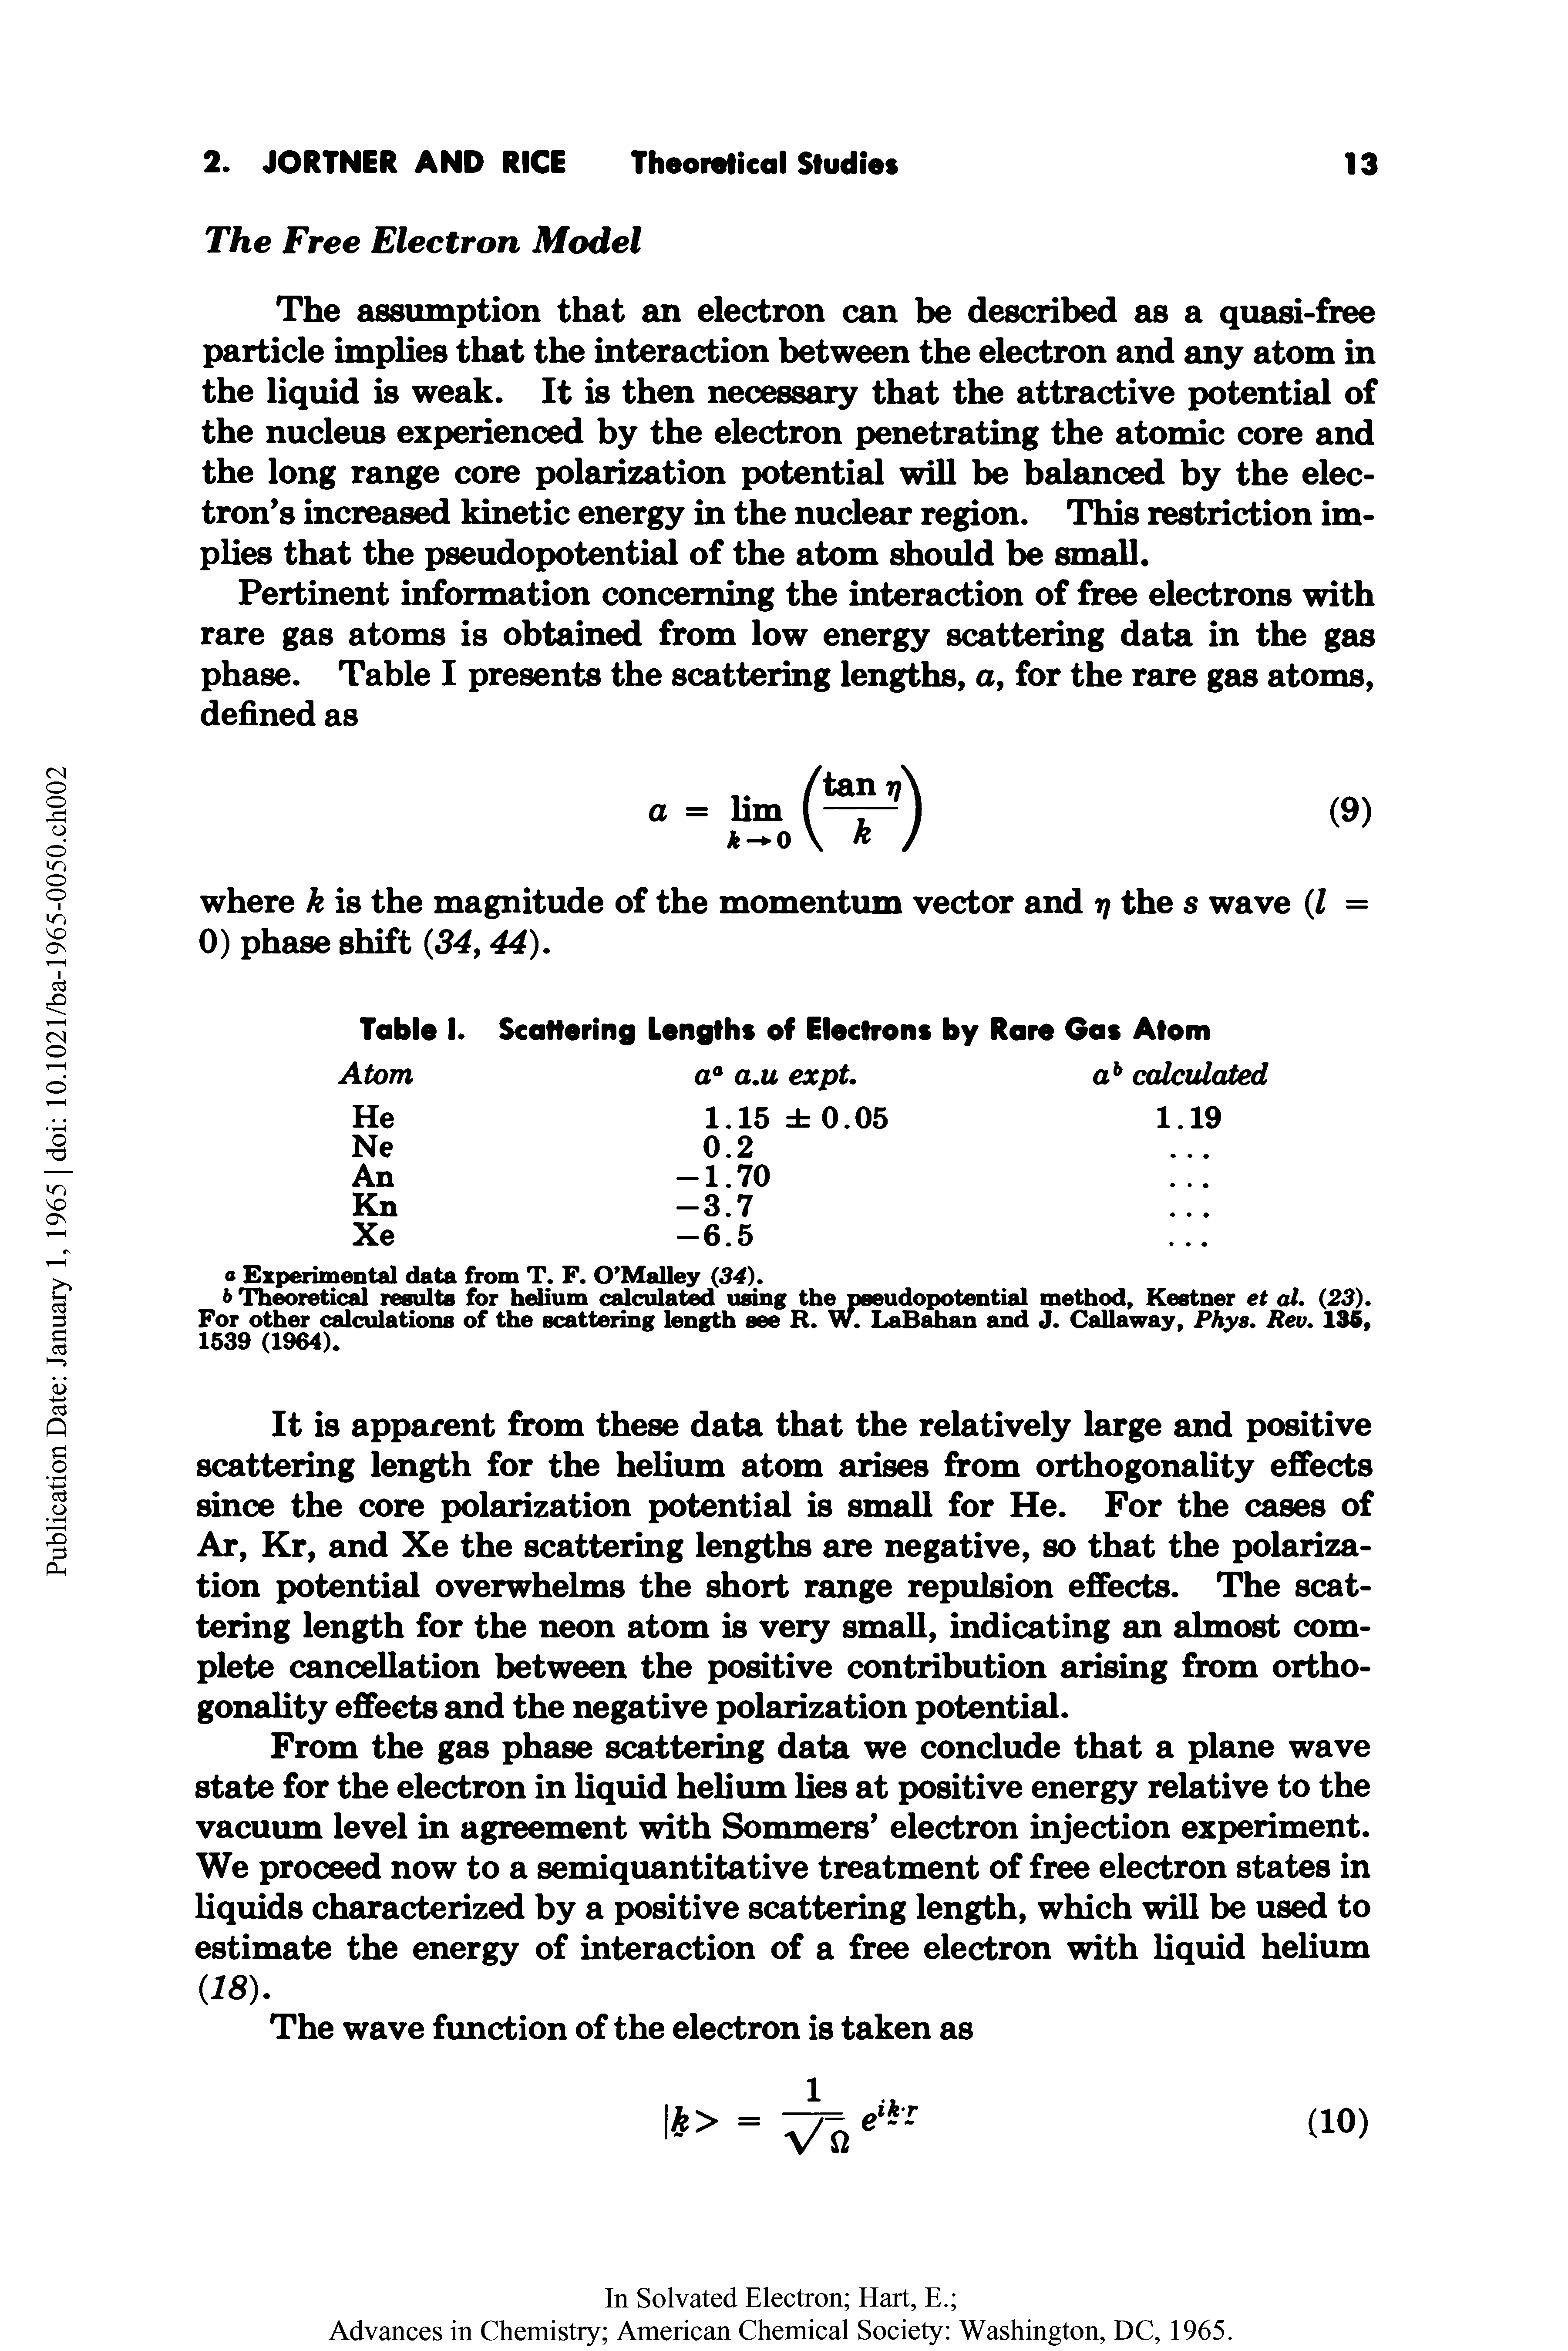 Table I. Scattering Lengths of Electrons by Rare Gas Atom...